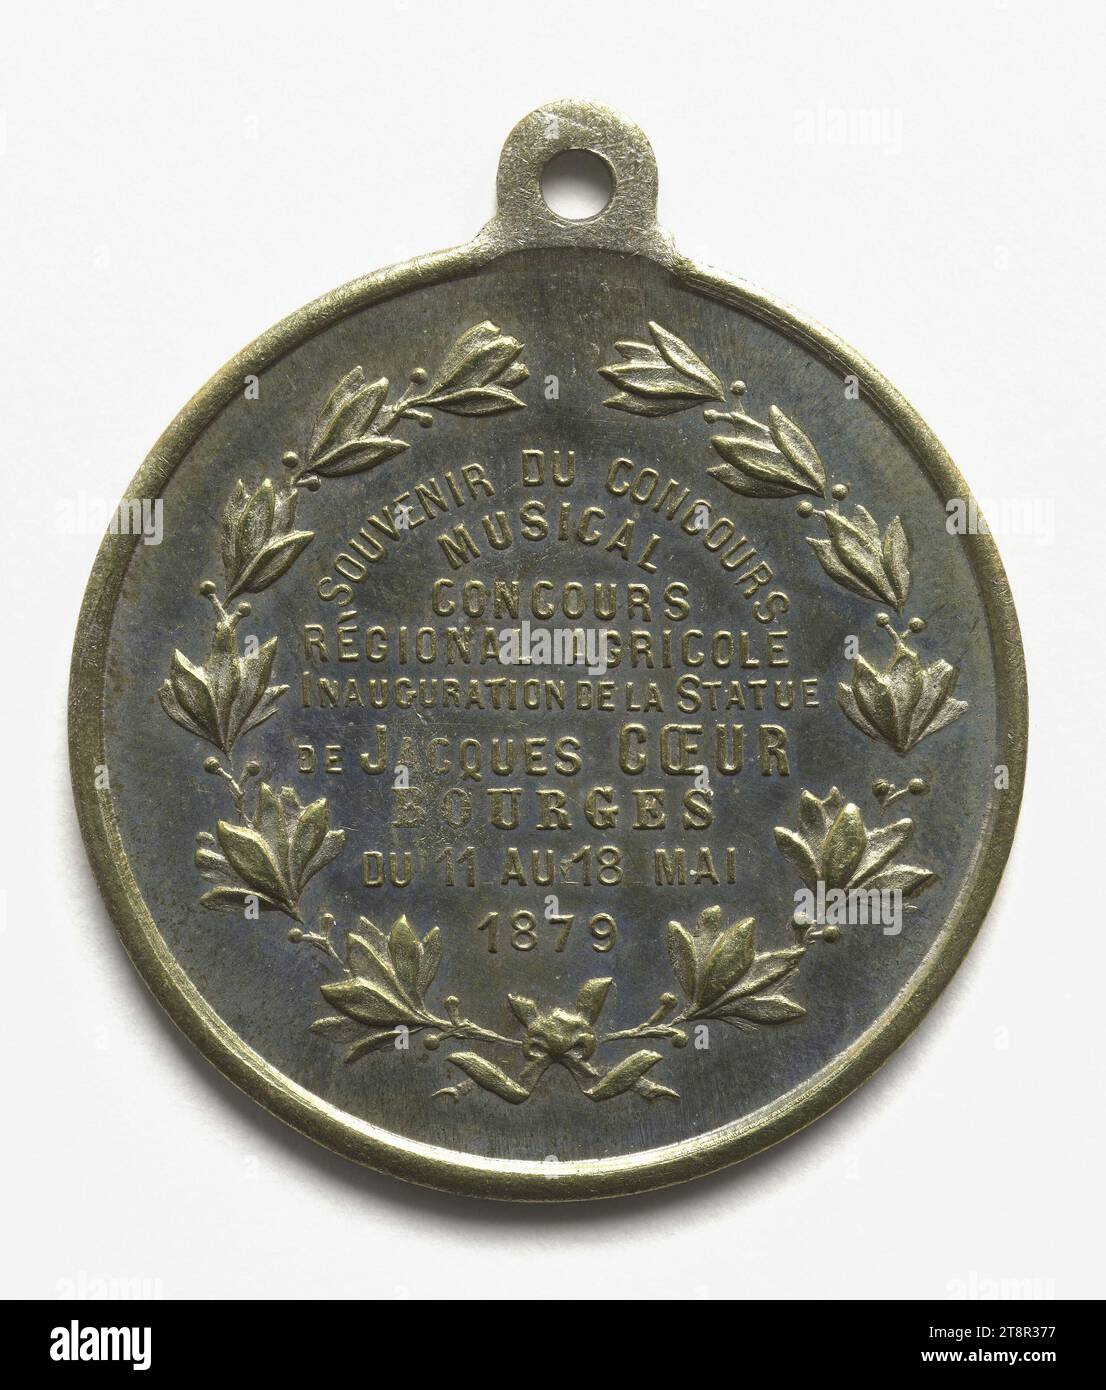 Musical contest, regional agricultural contest and inauguration of the statue of Jacques Coeur in Bourges, May 11-18, 1879, In 1879, Numismatic, Medal, Copper, Silver plated = silver plating, Sizes - Work: Diameter: 3.2 cm, Weight (type size): 7.93 g Stock Photo